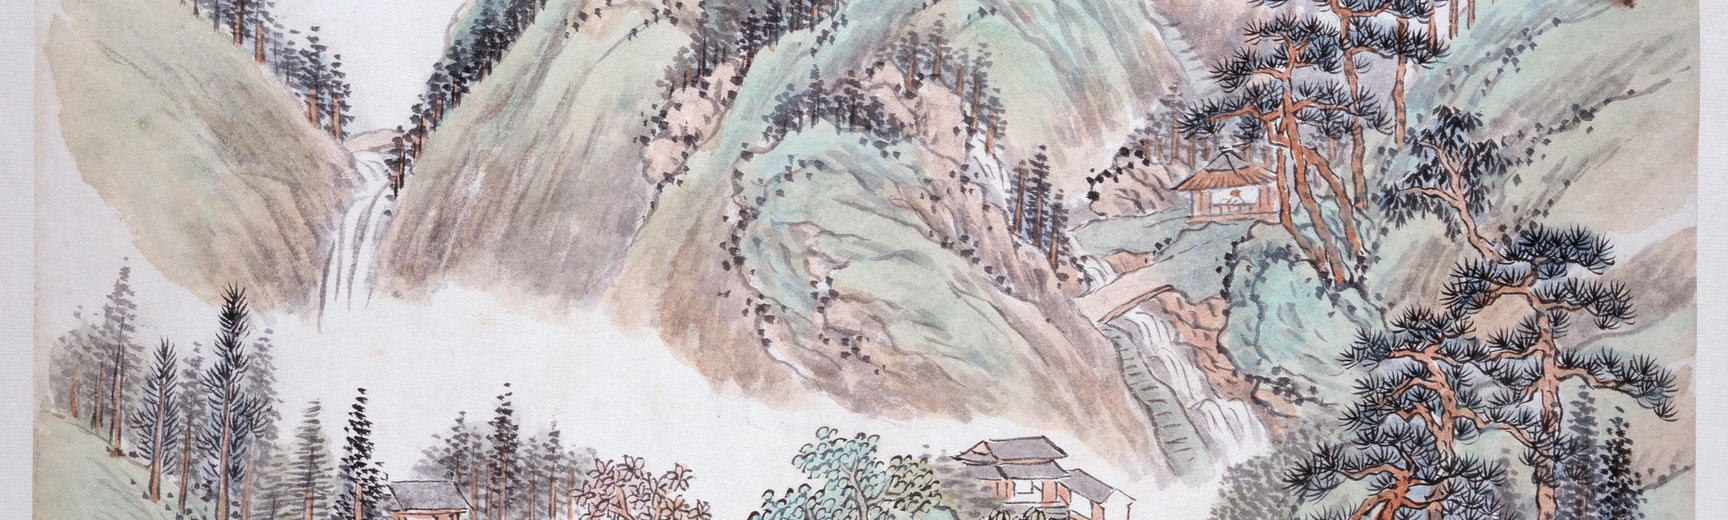 Peach Blossom Stream in Spring by Weng Tonghe, ink and colour on paper, 1902